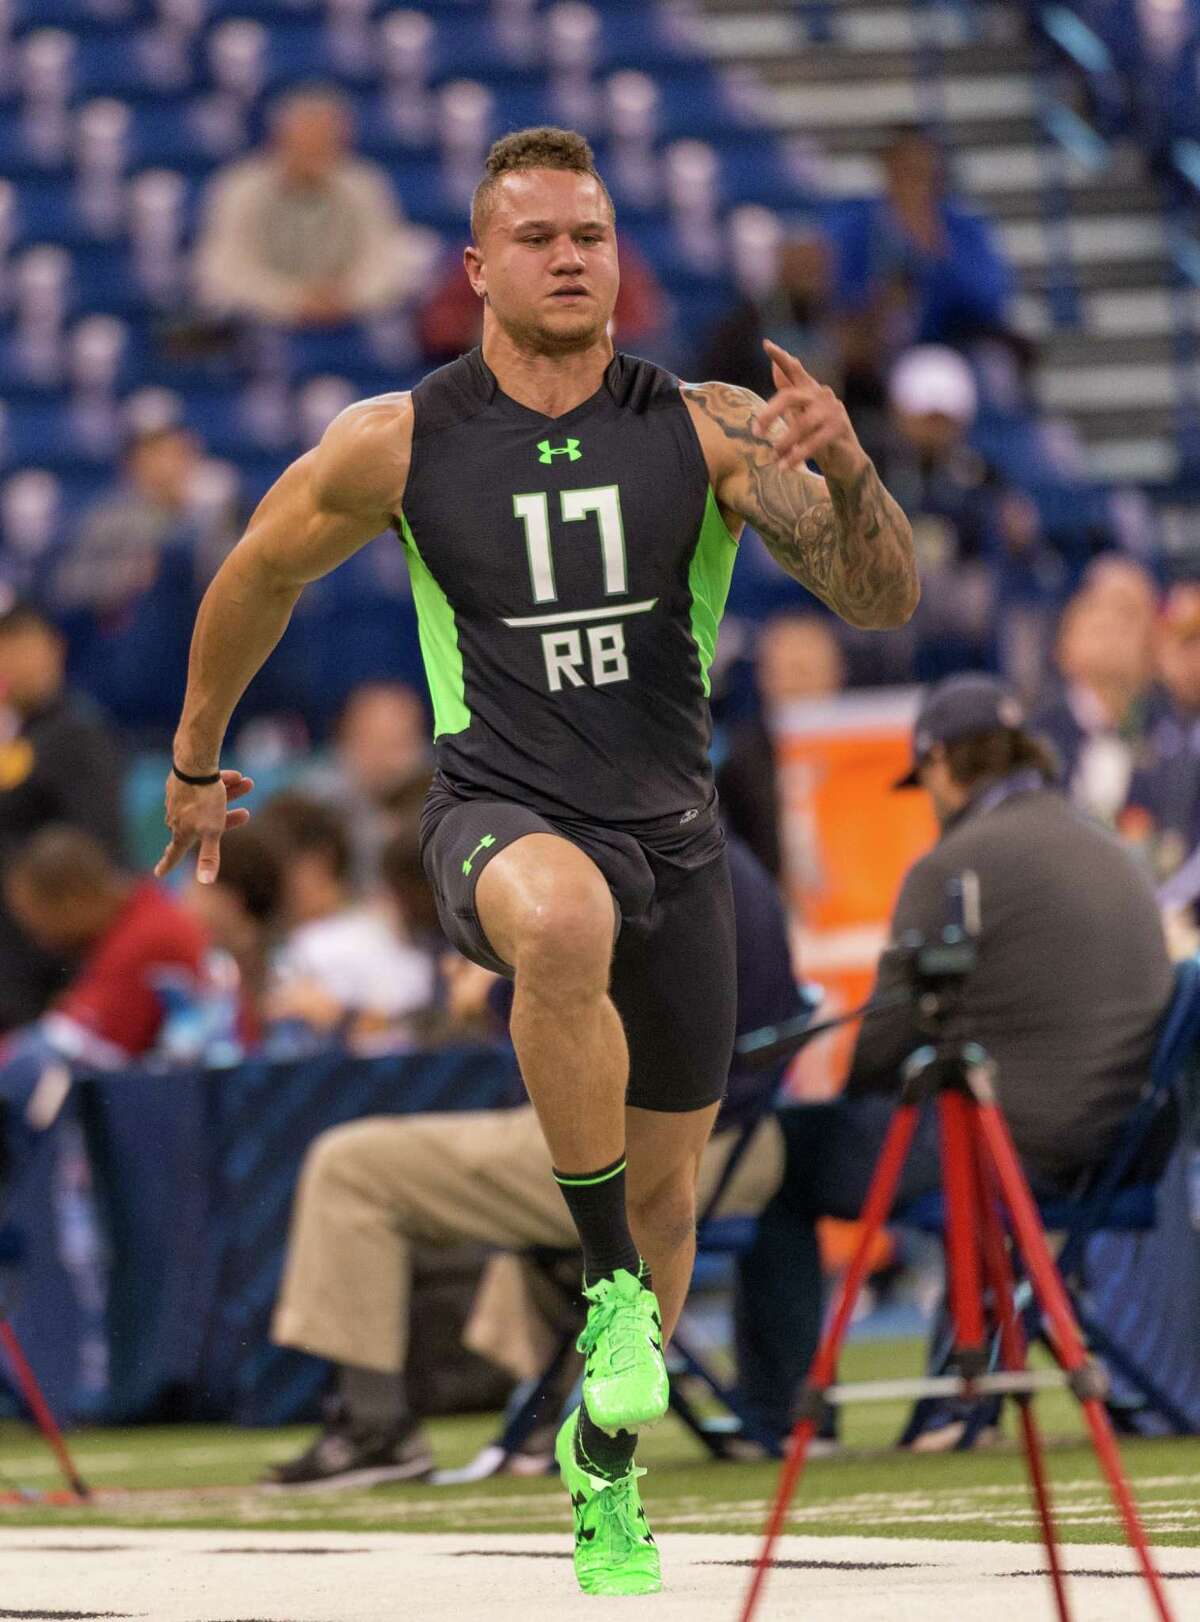 Cal running back Daniel Lasco's time of 4.46 seconds in the 40-yard dash at the combine caught the attention of NFL scouts.